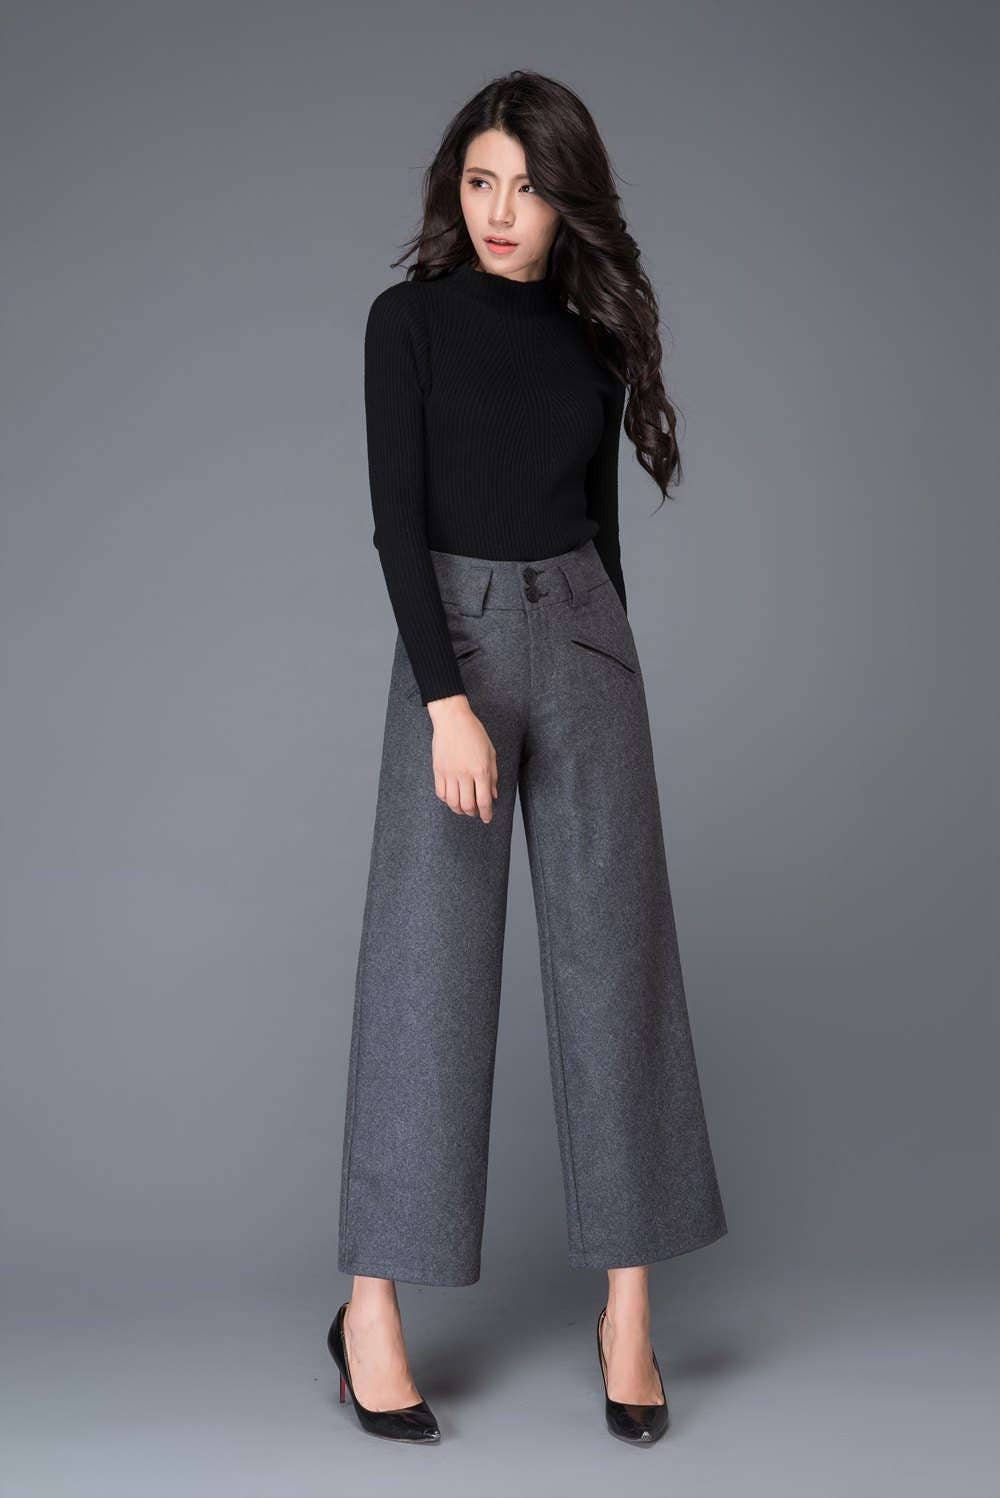 8 Types of Pants for Women That Can Be a Best Style Statement For You